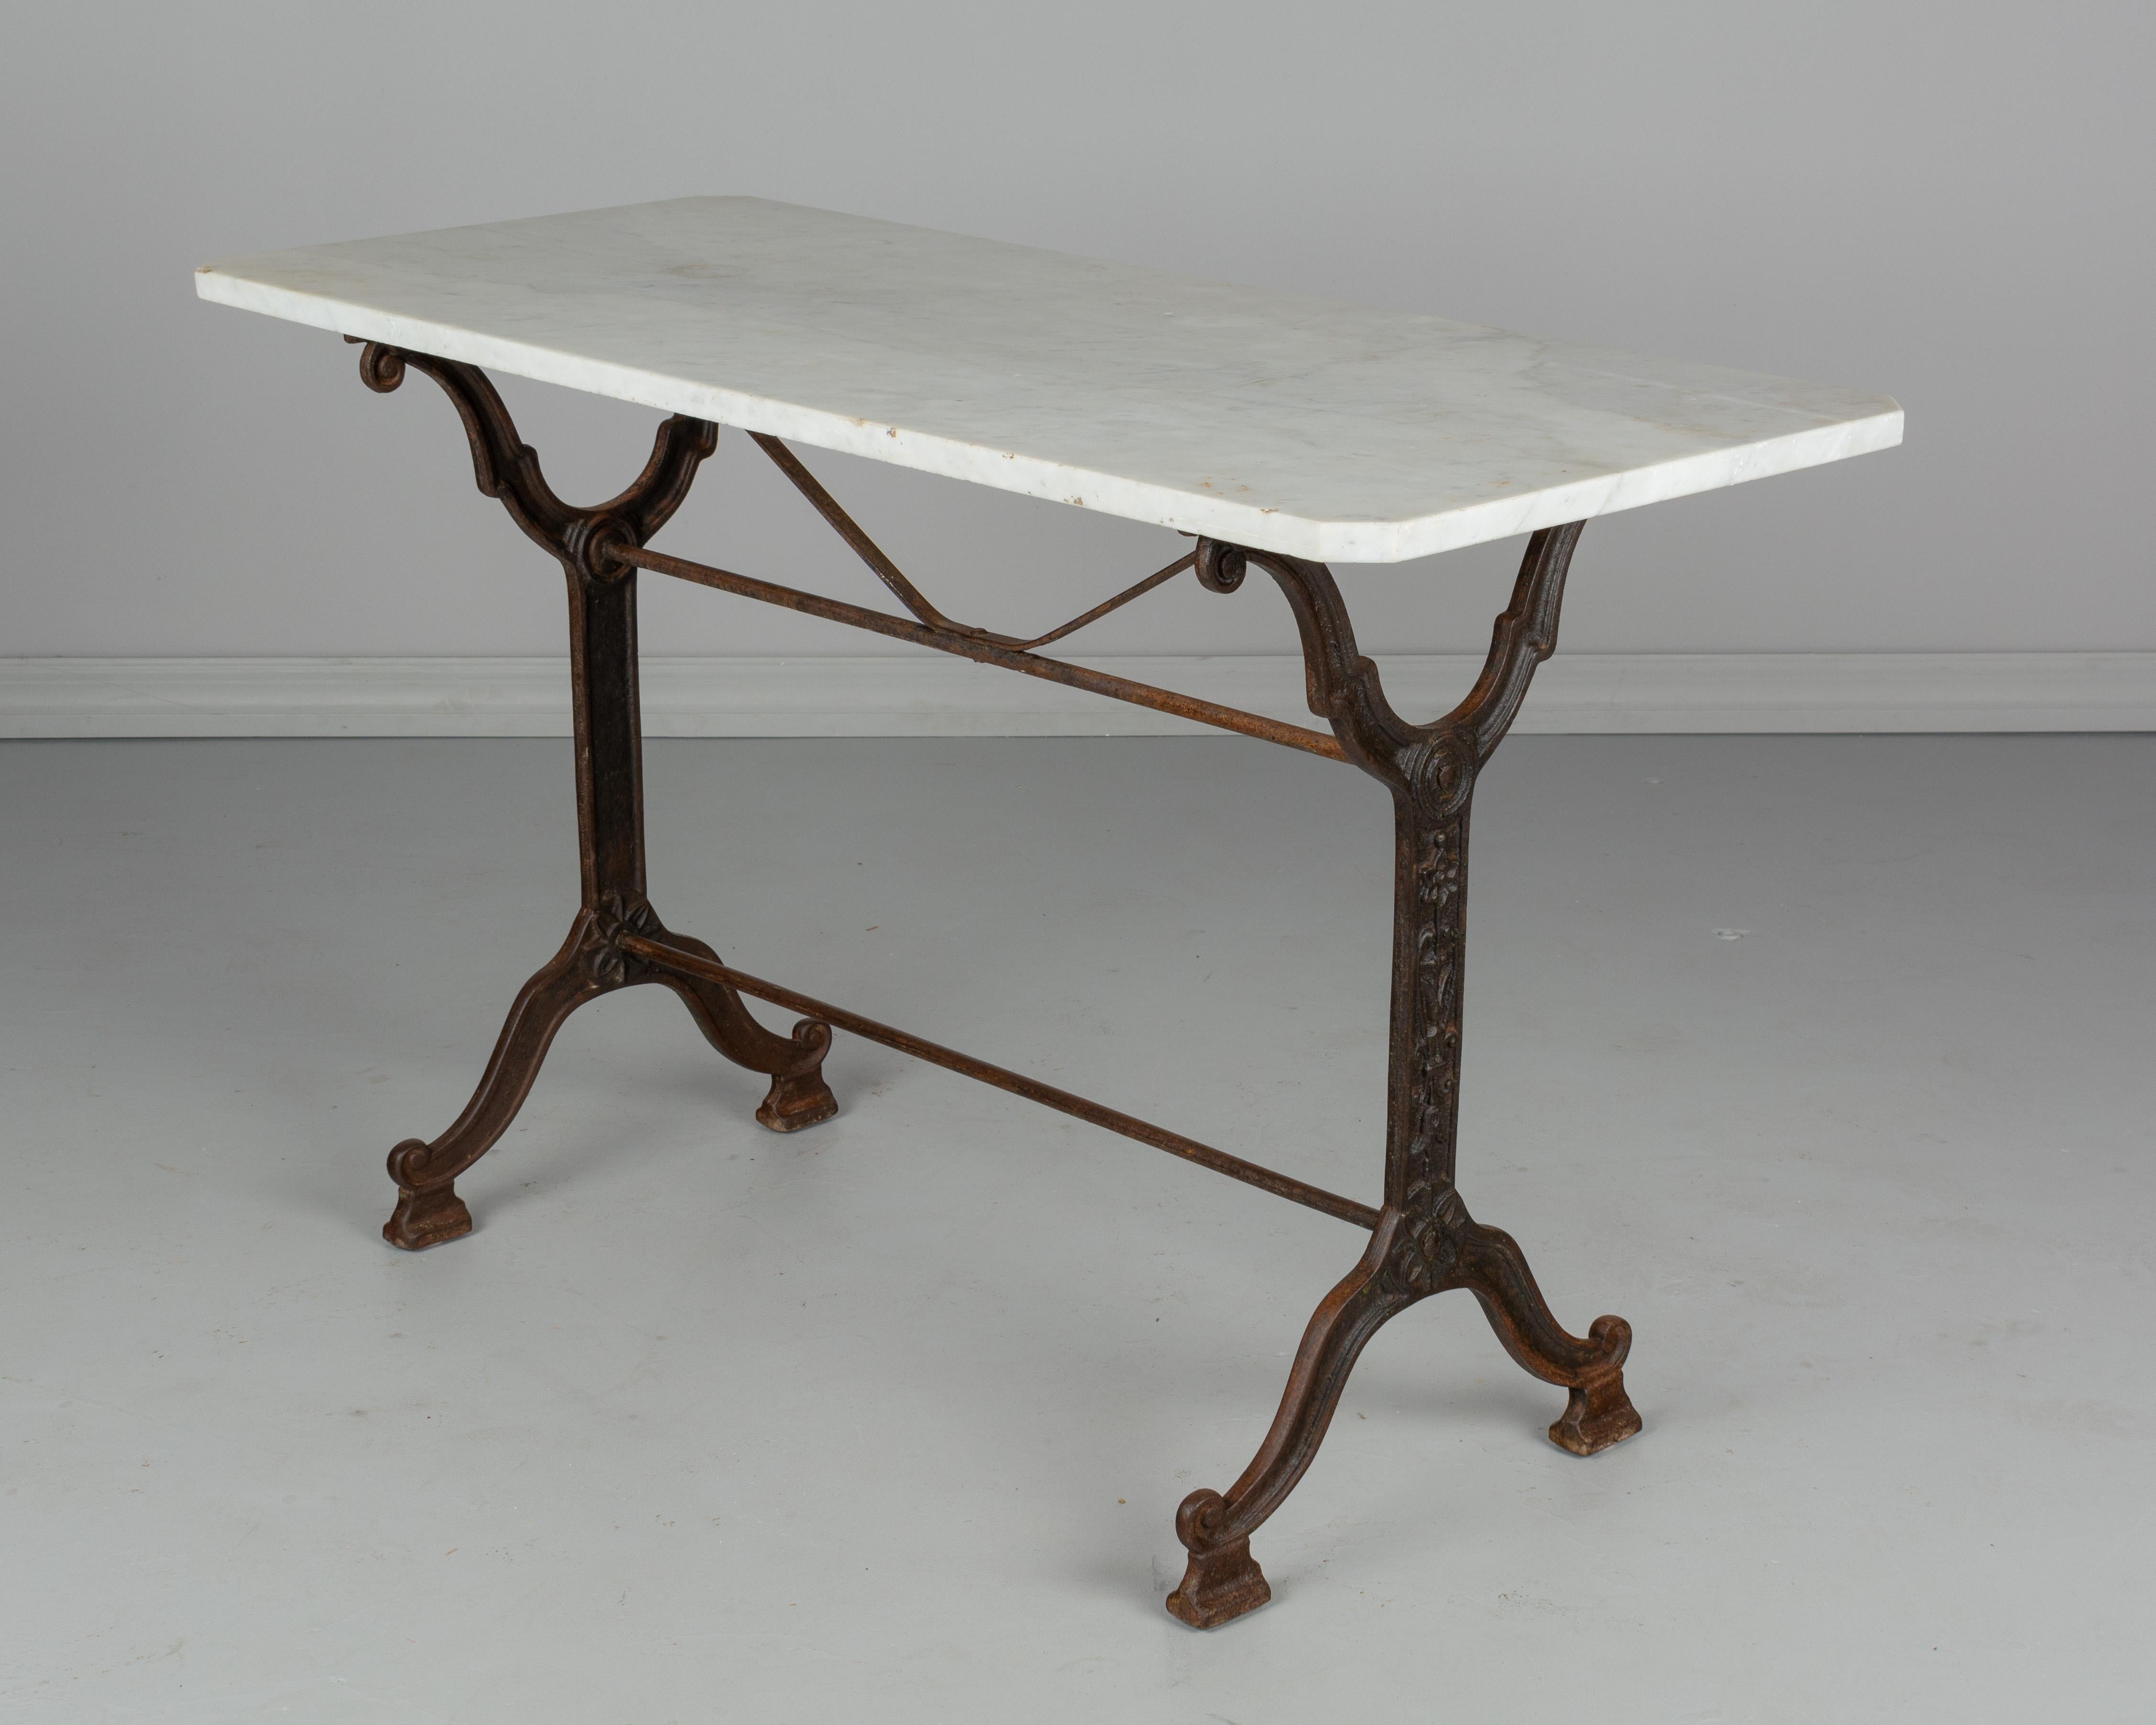 A French cast iron bistro table with marble top. Nice casting with stylized floral motif and warm patina. White marble top is 3/4